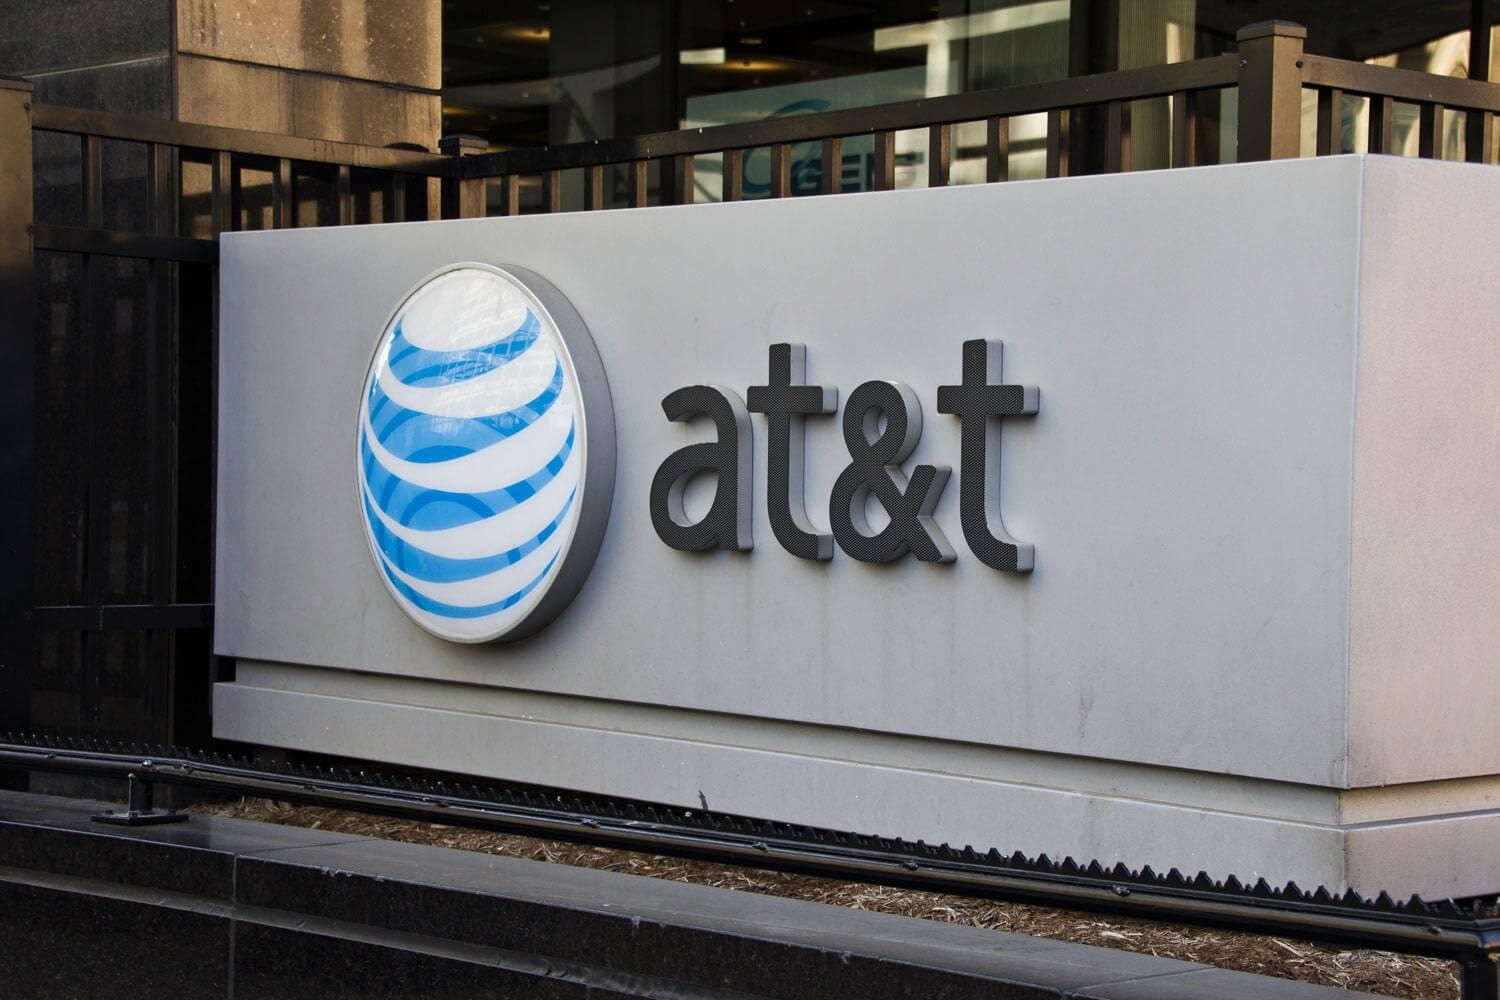 AT&T is planning to launch a 5G mobile network in the coming weeks